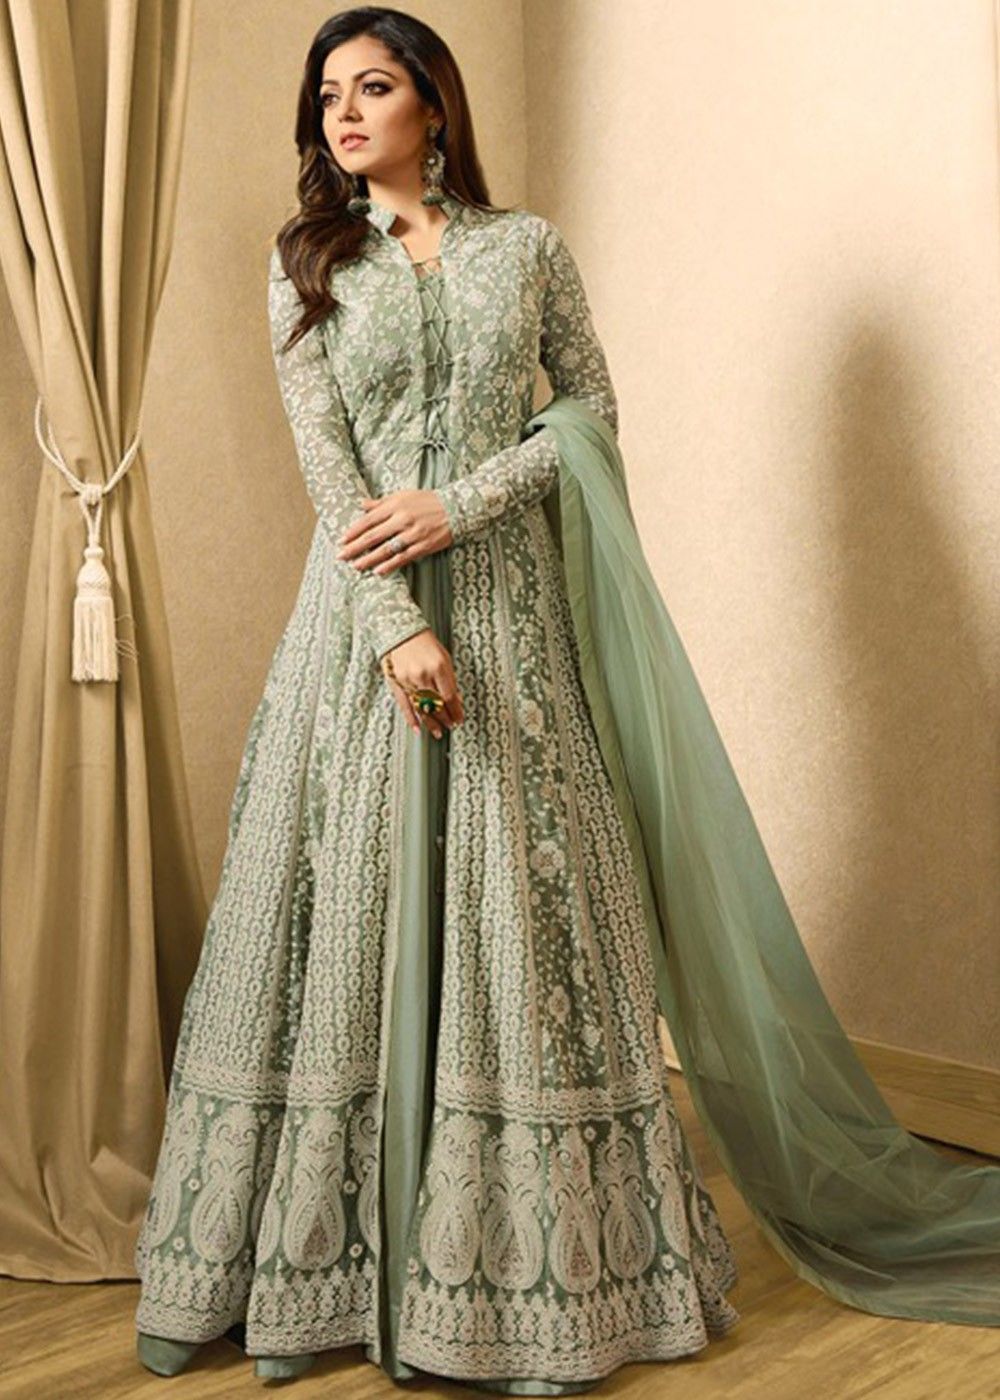 Buy online Green Semi-stitched Suit Set from Suits & Dress